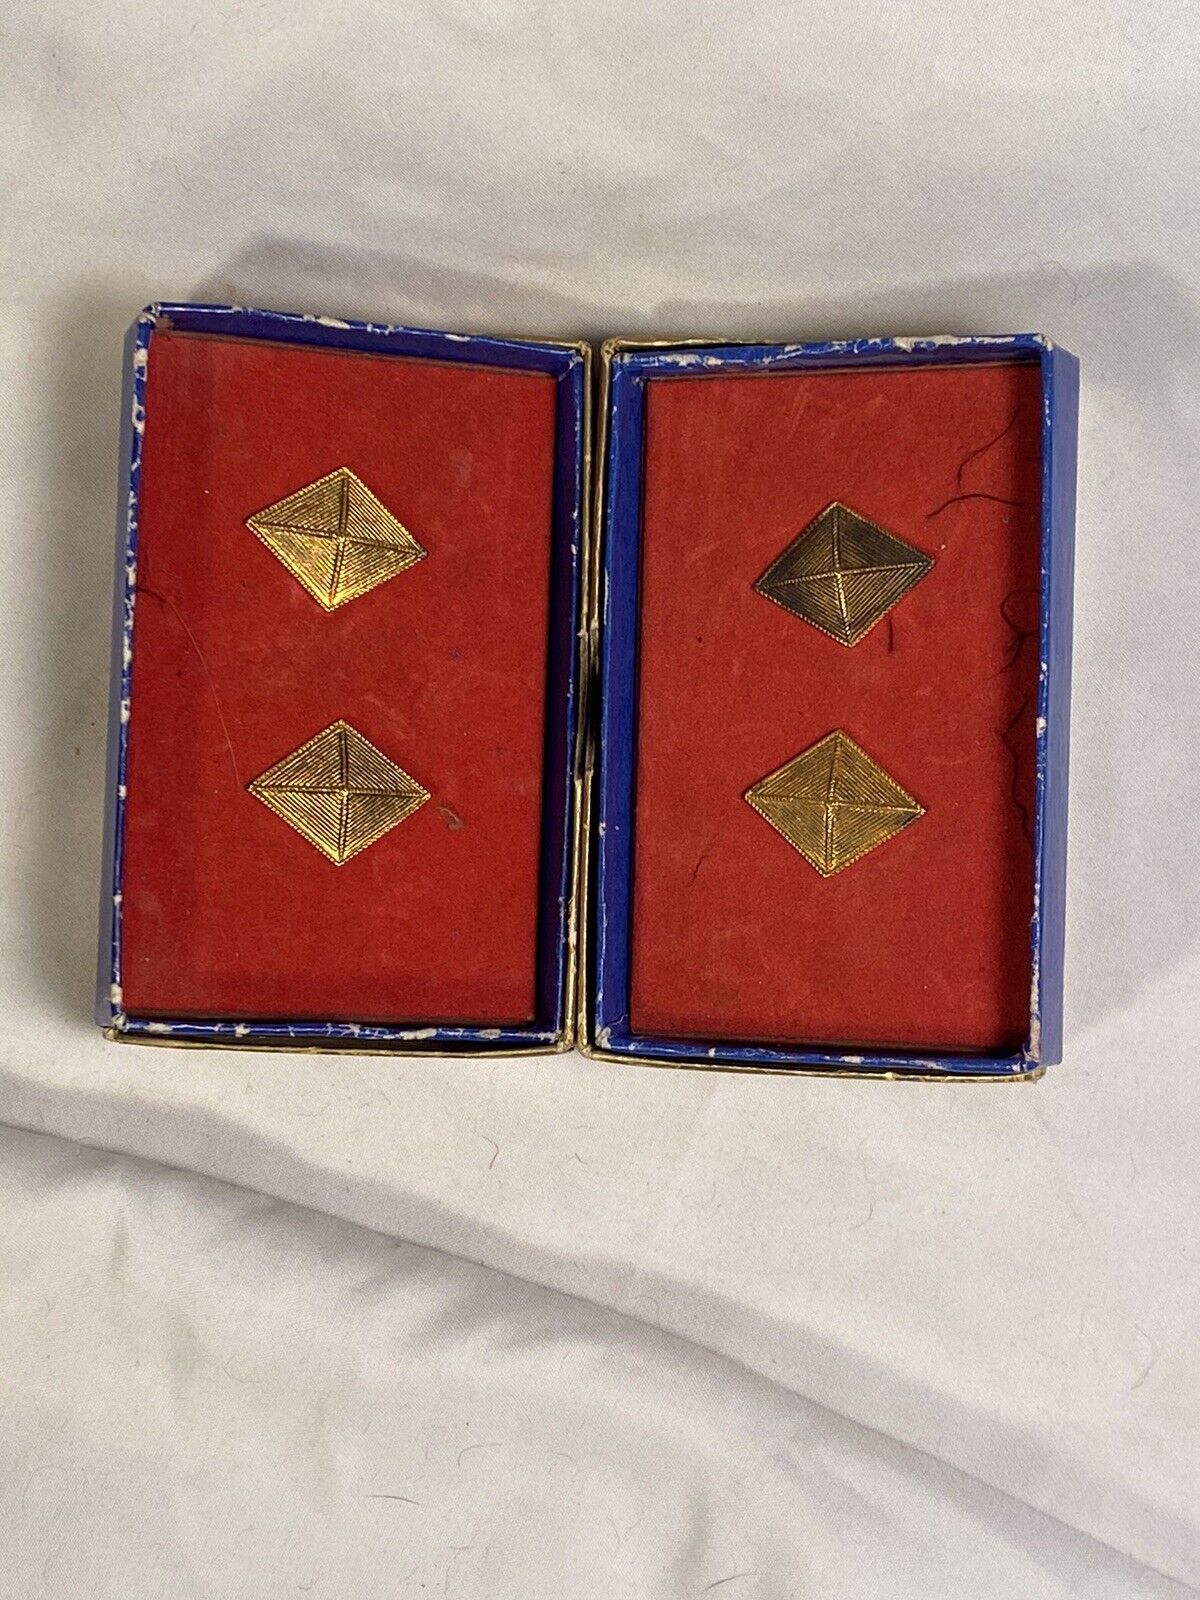 Vtg Wwii Us Army Finance Corps Officer Lapel Collar Insignia Set W Box Lot Gold